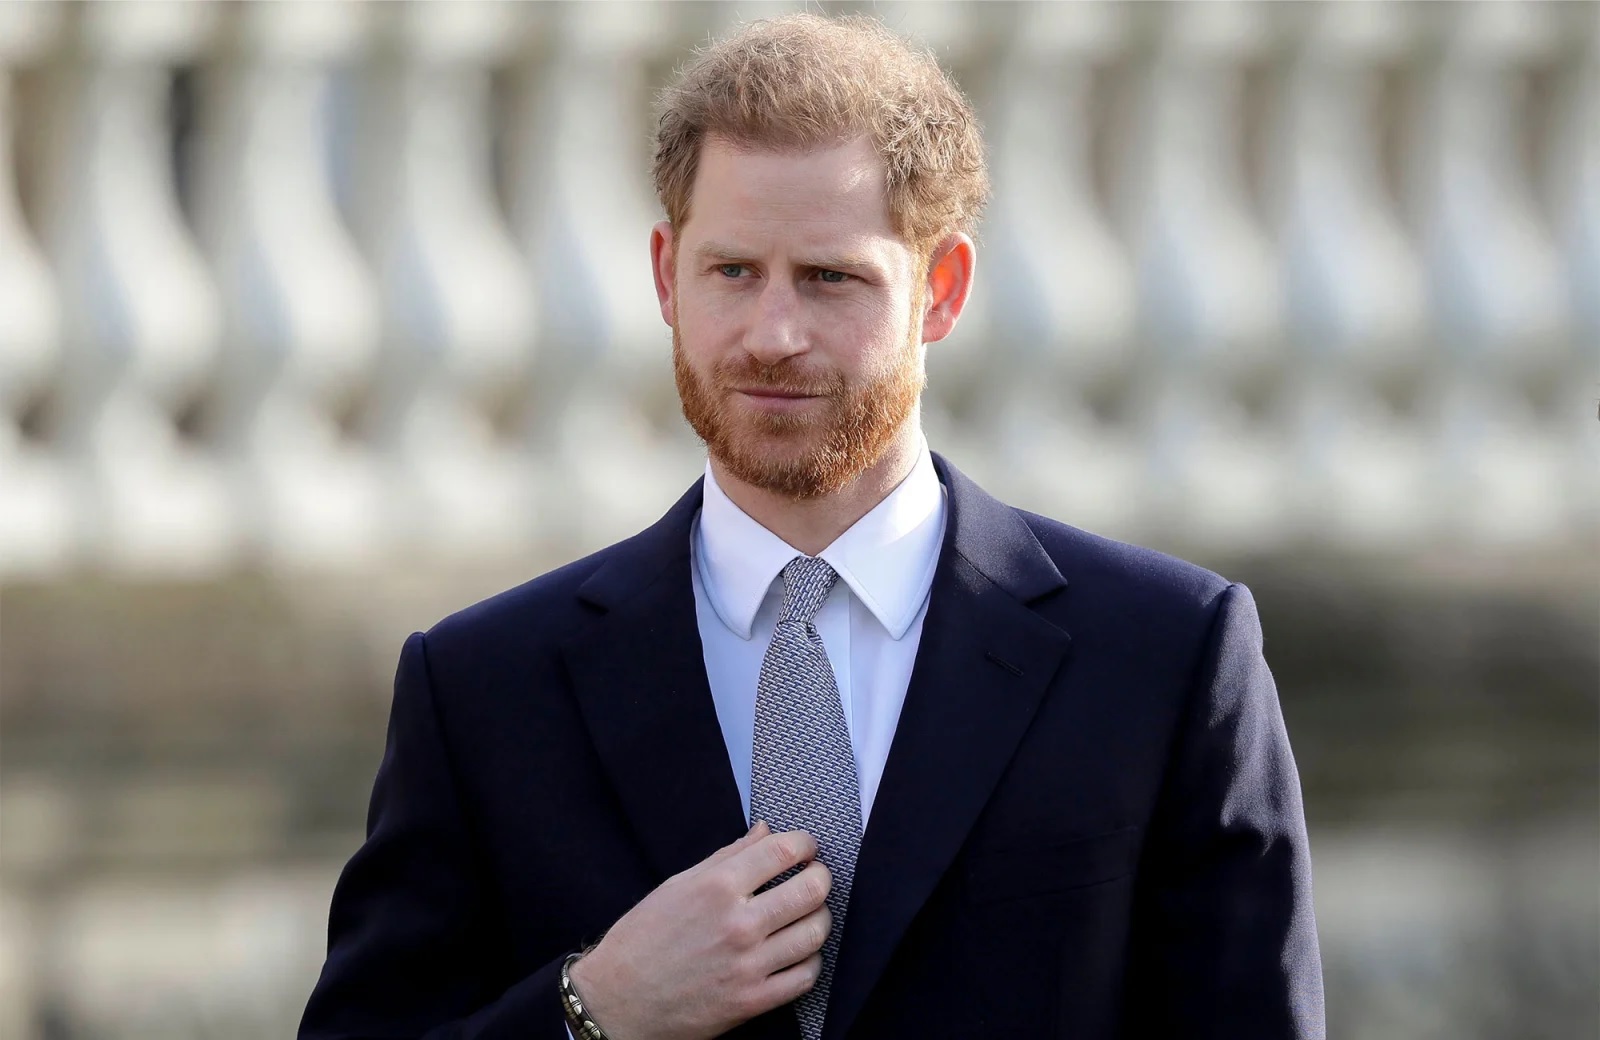 Harry warned over his next move as memoir could make rift with William 'unfixable'